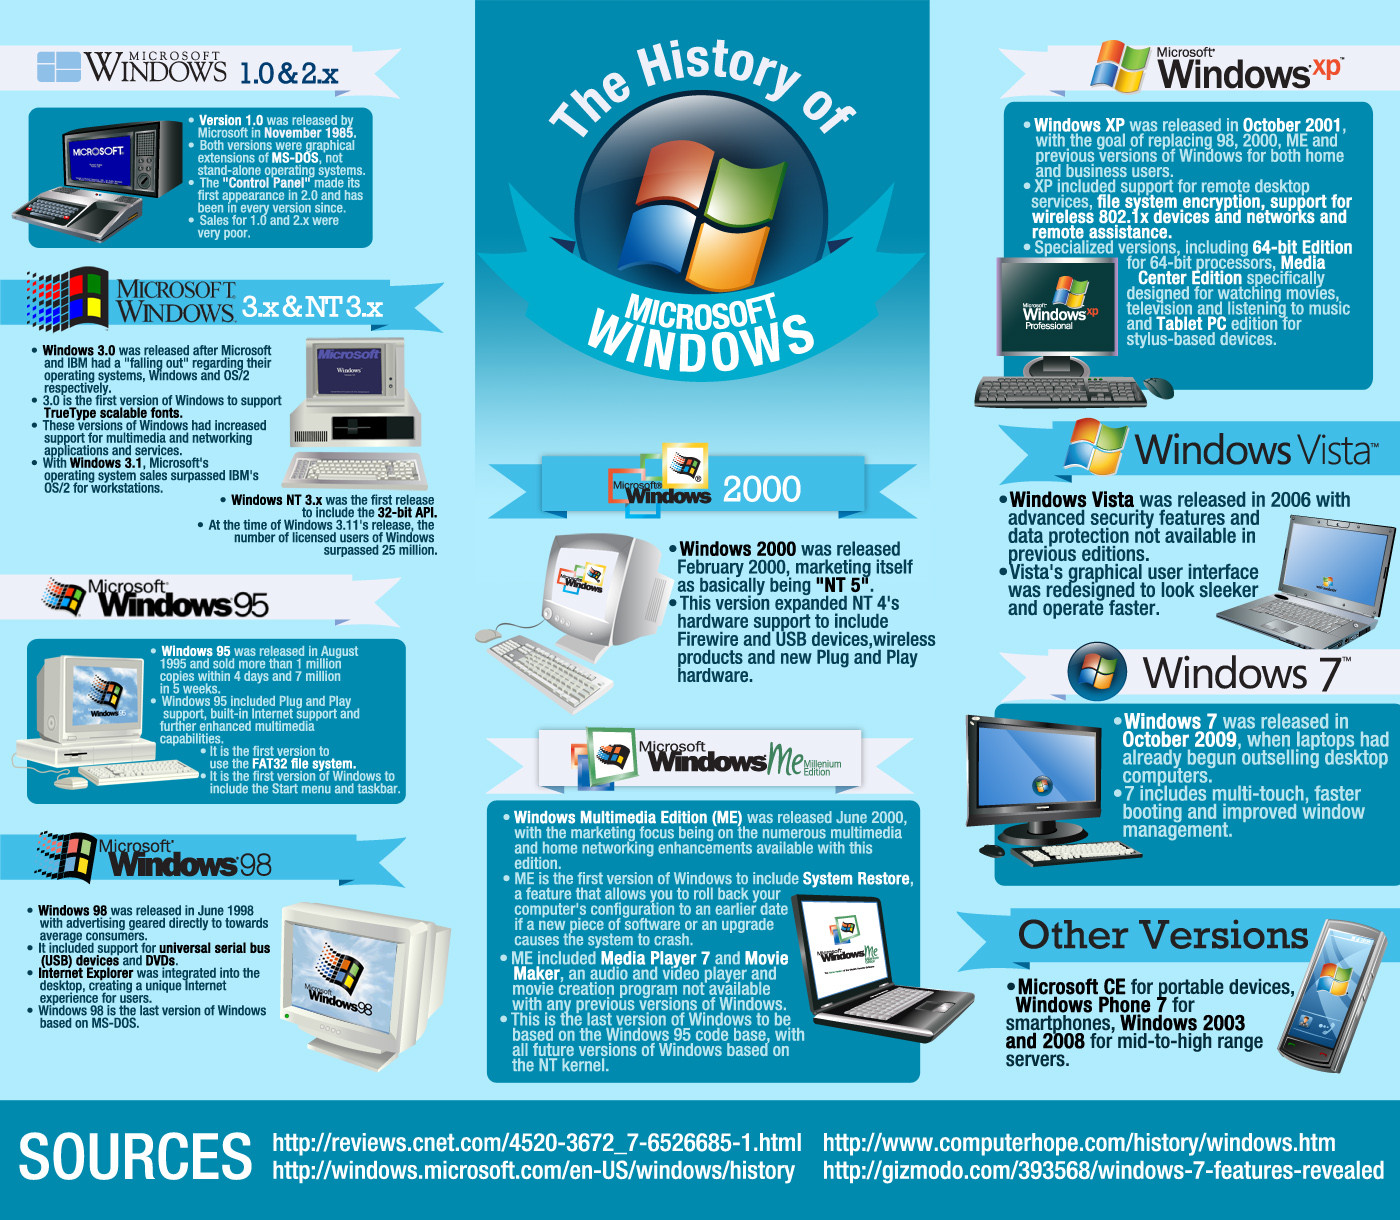 How To Make An Infographic On Operating Systems